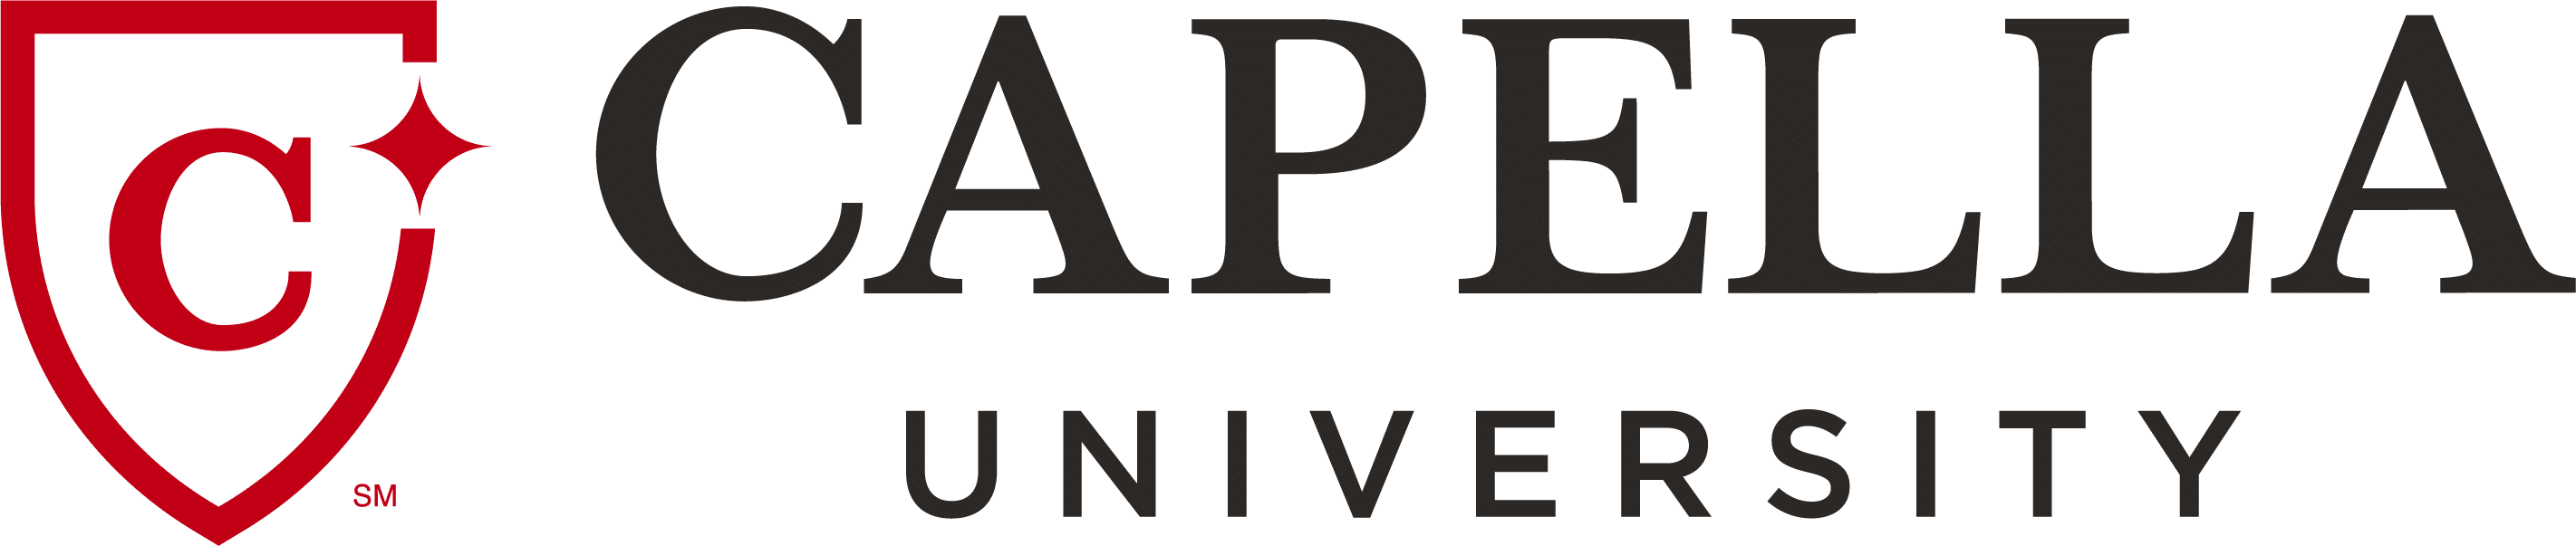 Bachelor of Science in Applied Behavior Analysis Program at Capella University